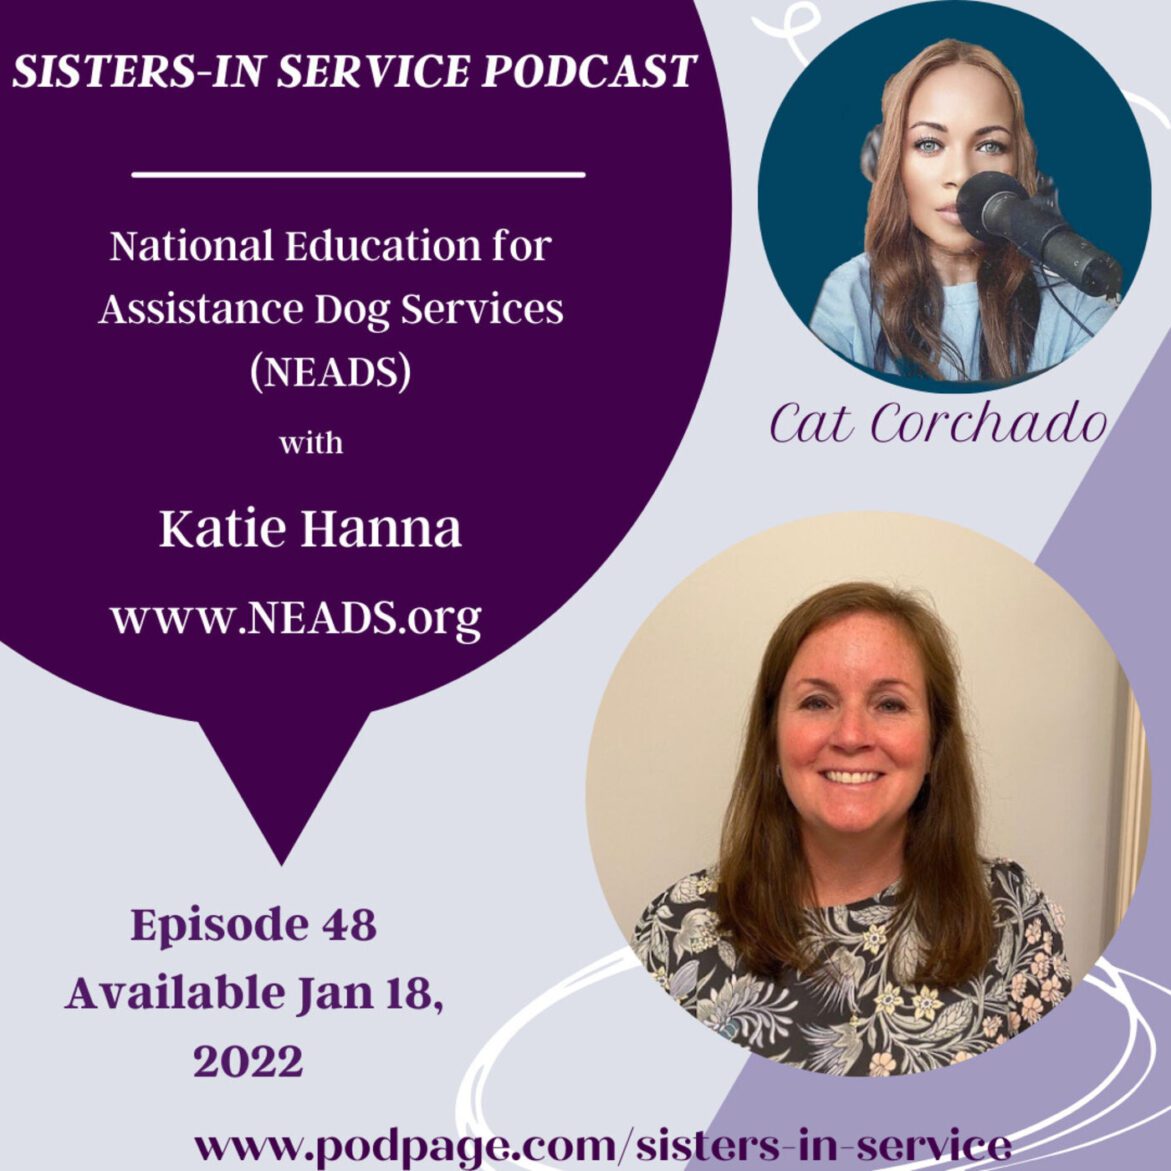 Black Podcasting - Katie Hanna - National Education for Assistance Dog Services (NEADS)